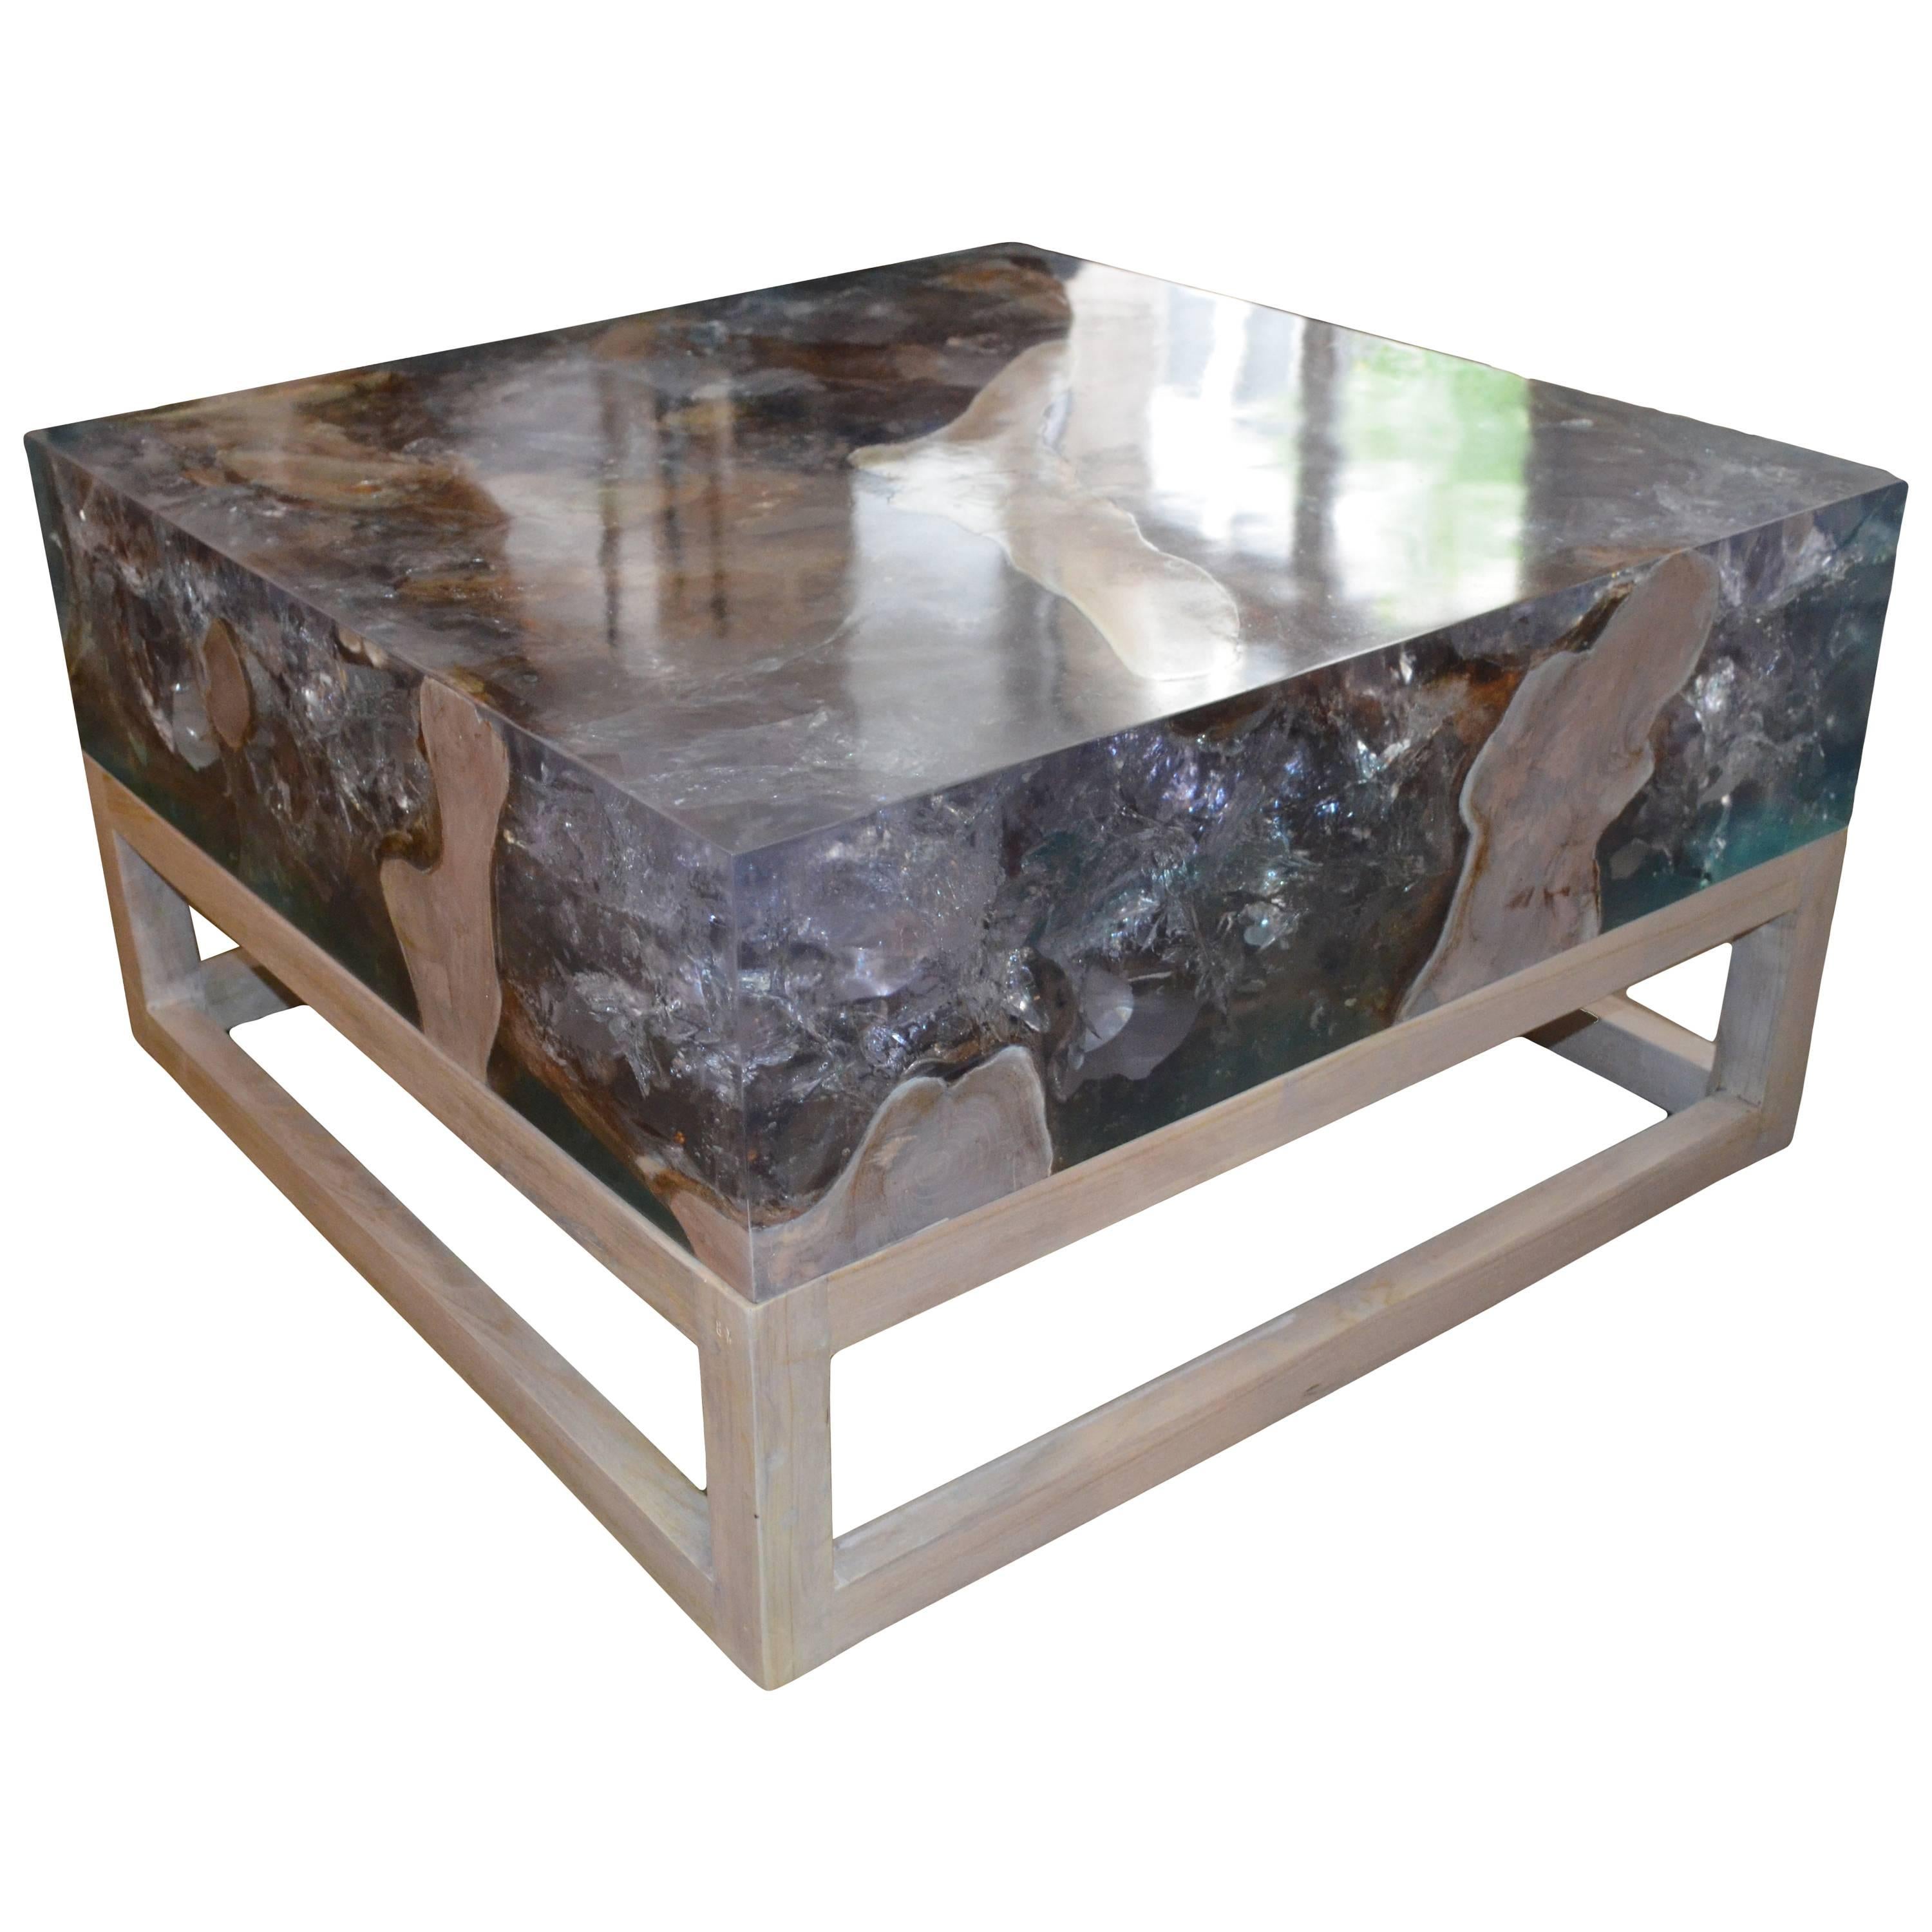 Andrianna Shamaris St. Barts Cracked Resin Coffee Table or Side Table